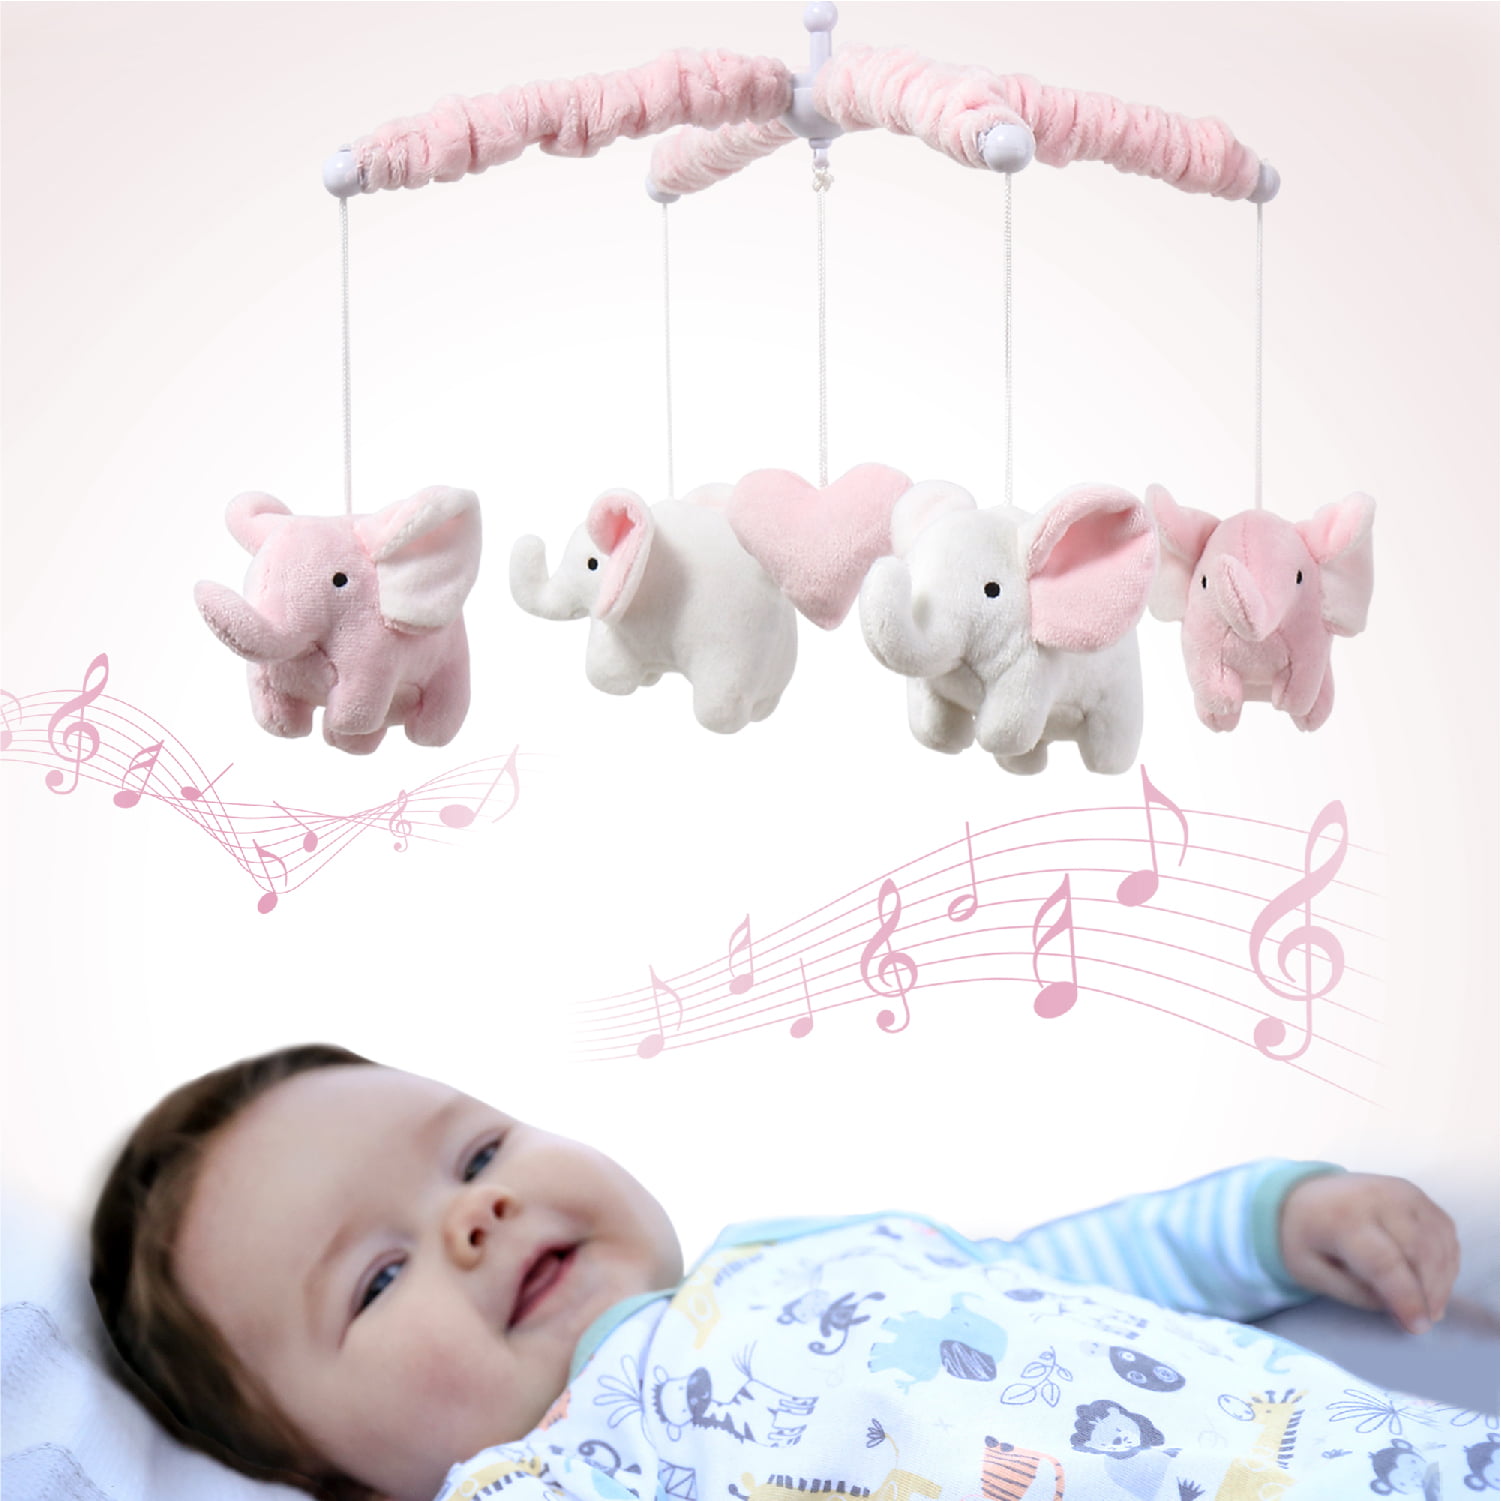 Elephant Baby Mobile for Crib Girls Digital Music Box with 15 lullabies Nursery Mobile for Pink Elephant Décor EVERLOVE Elephant Musical Crib Mobile for Baby Girls 